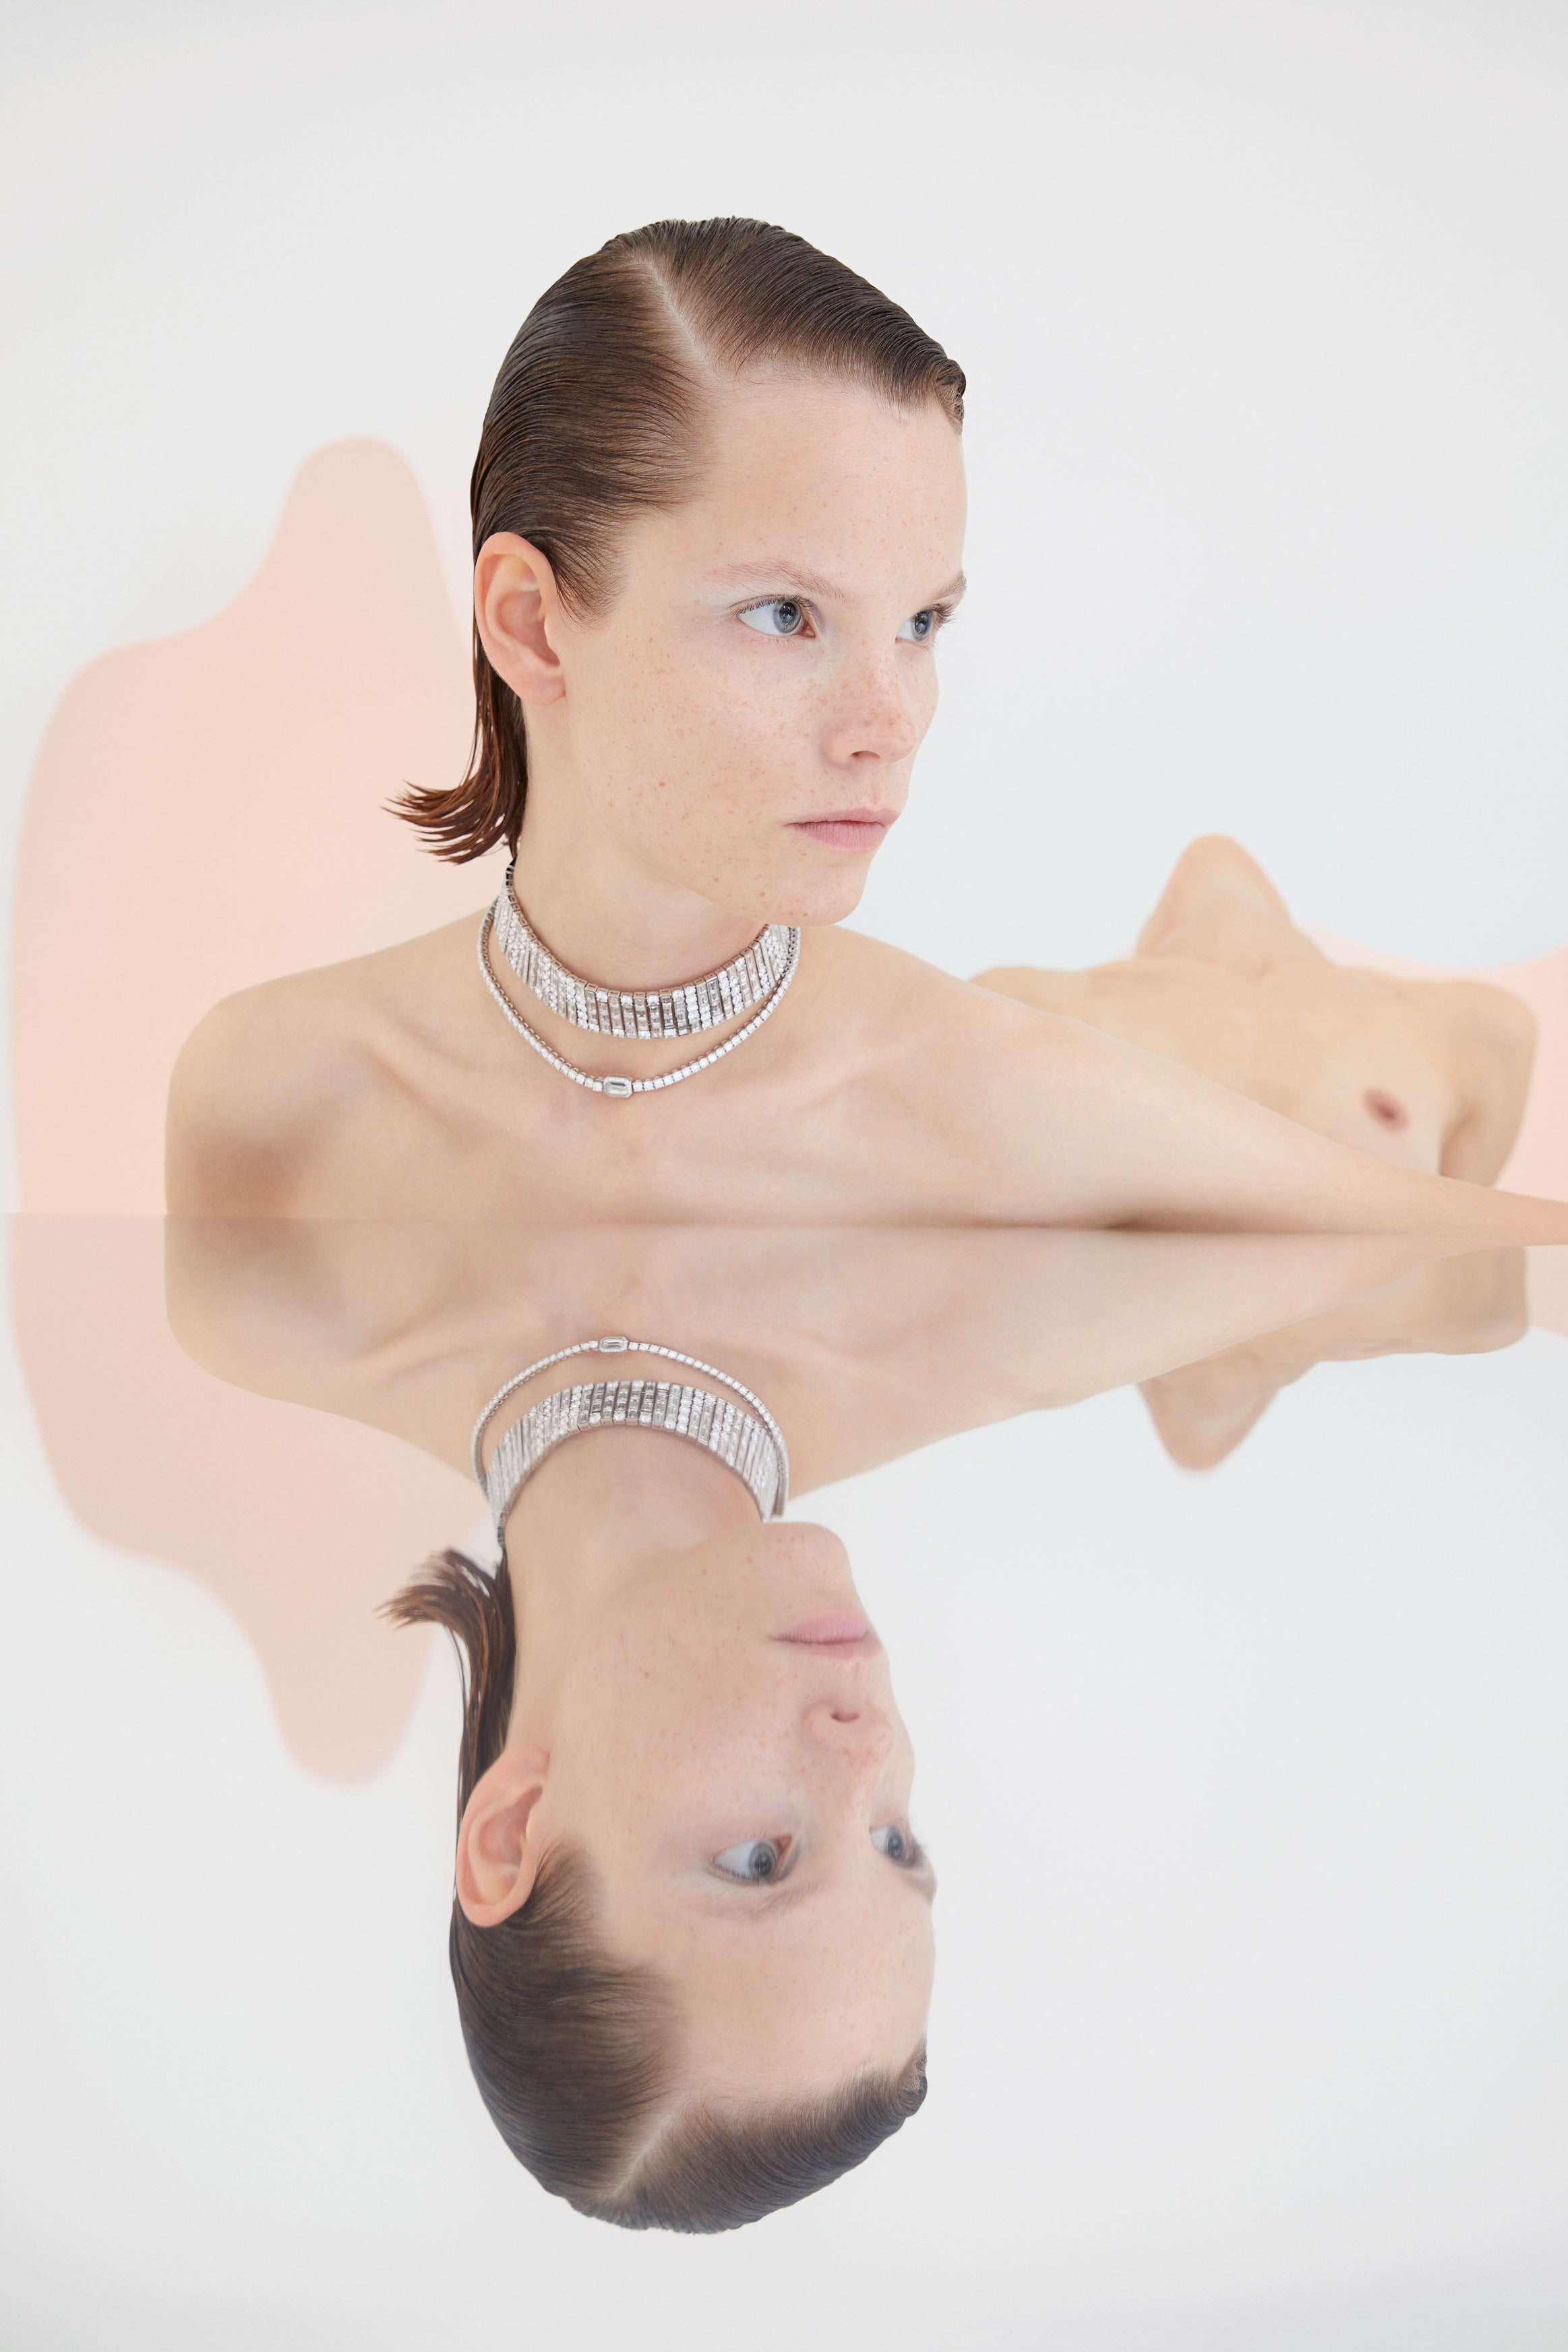 Reflection of topless model wearing choker and short necklace in mirror